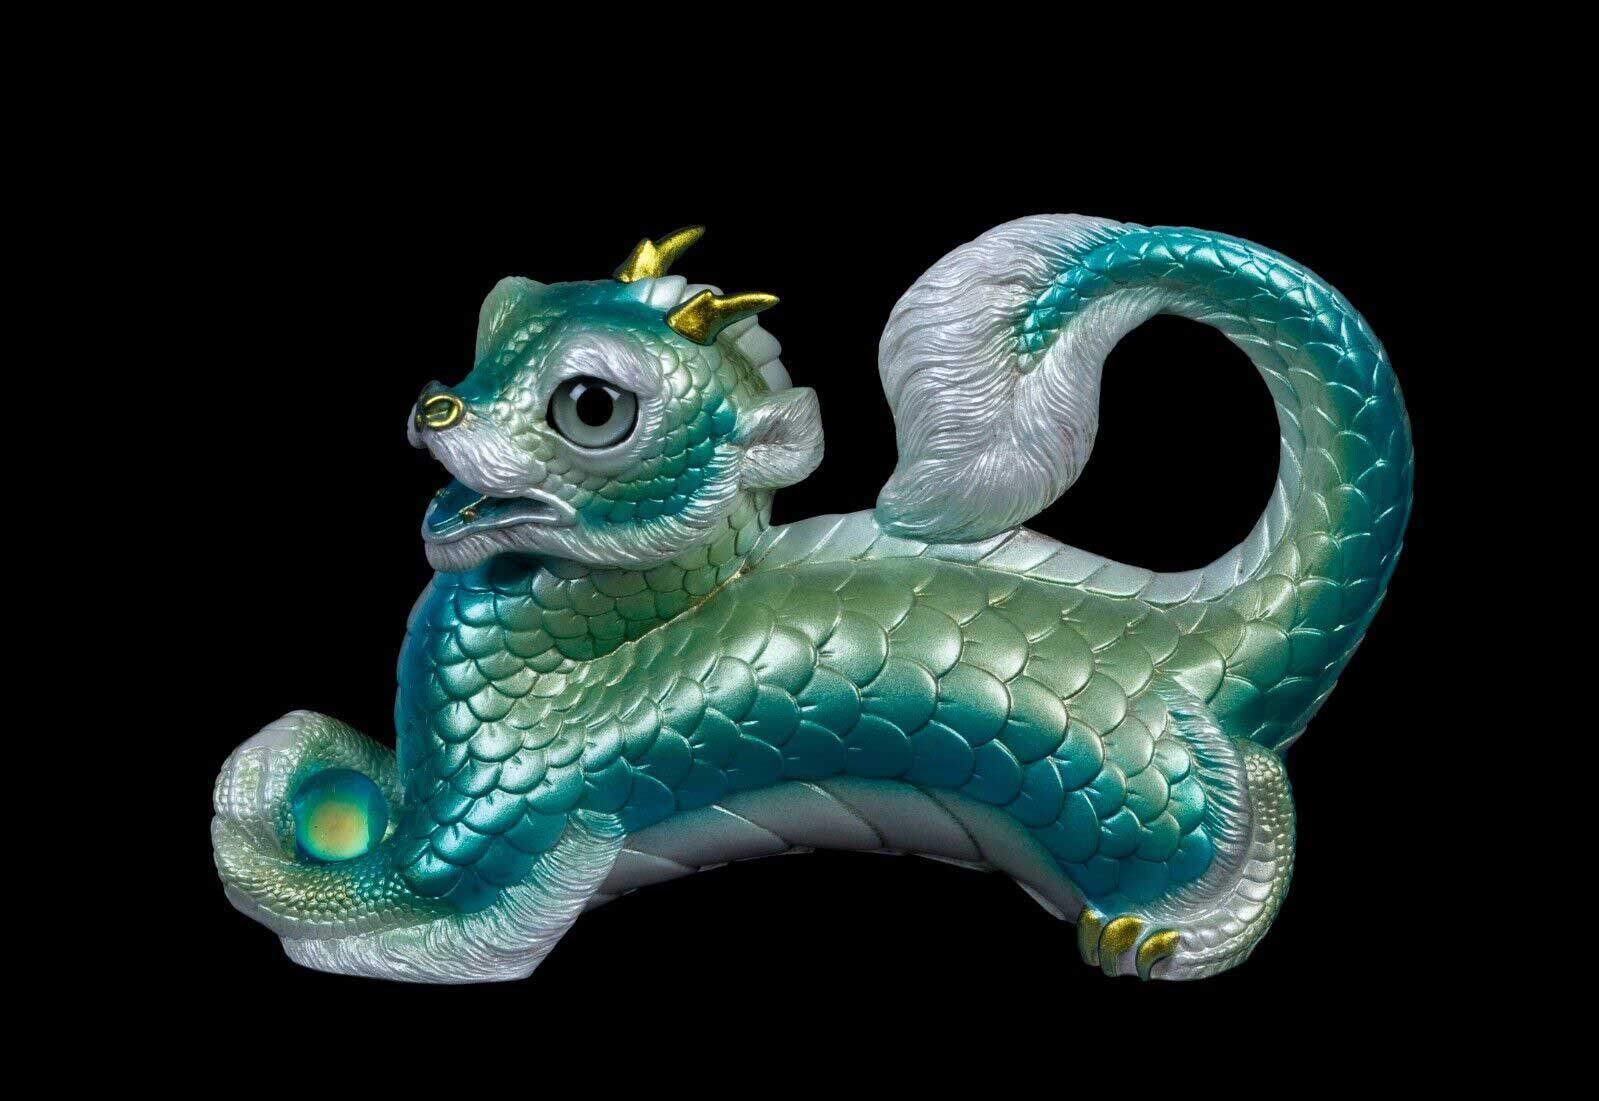 20230401-Seaglass-Young-Oriental-Dragon-Test-Paint-1-by-Gina